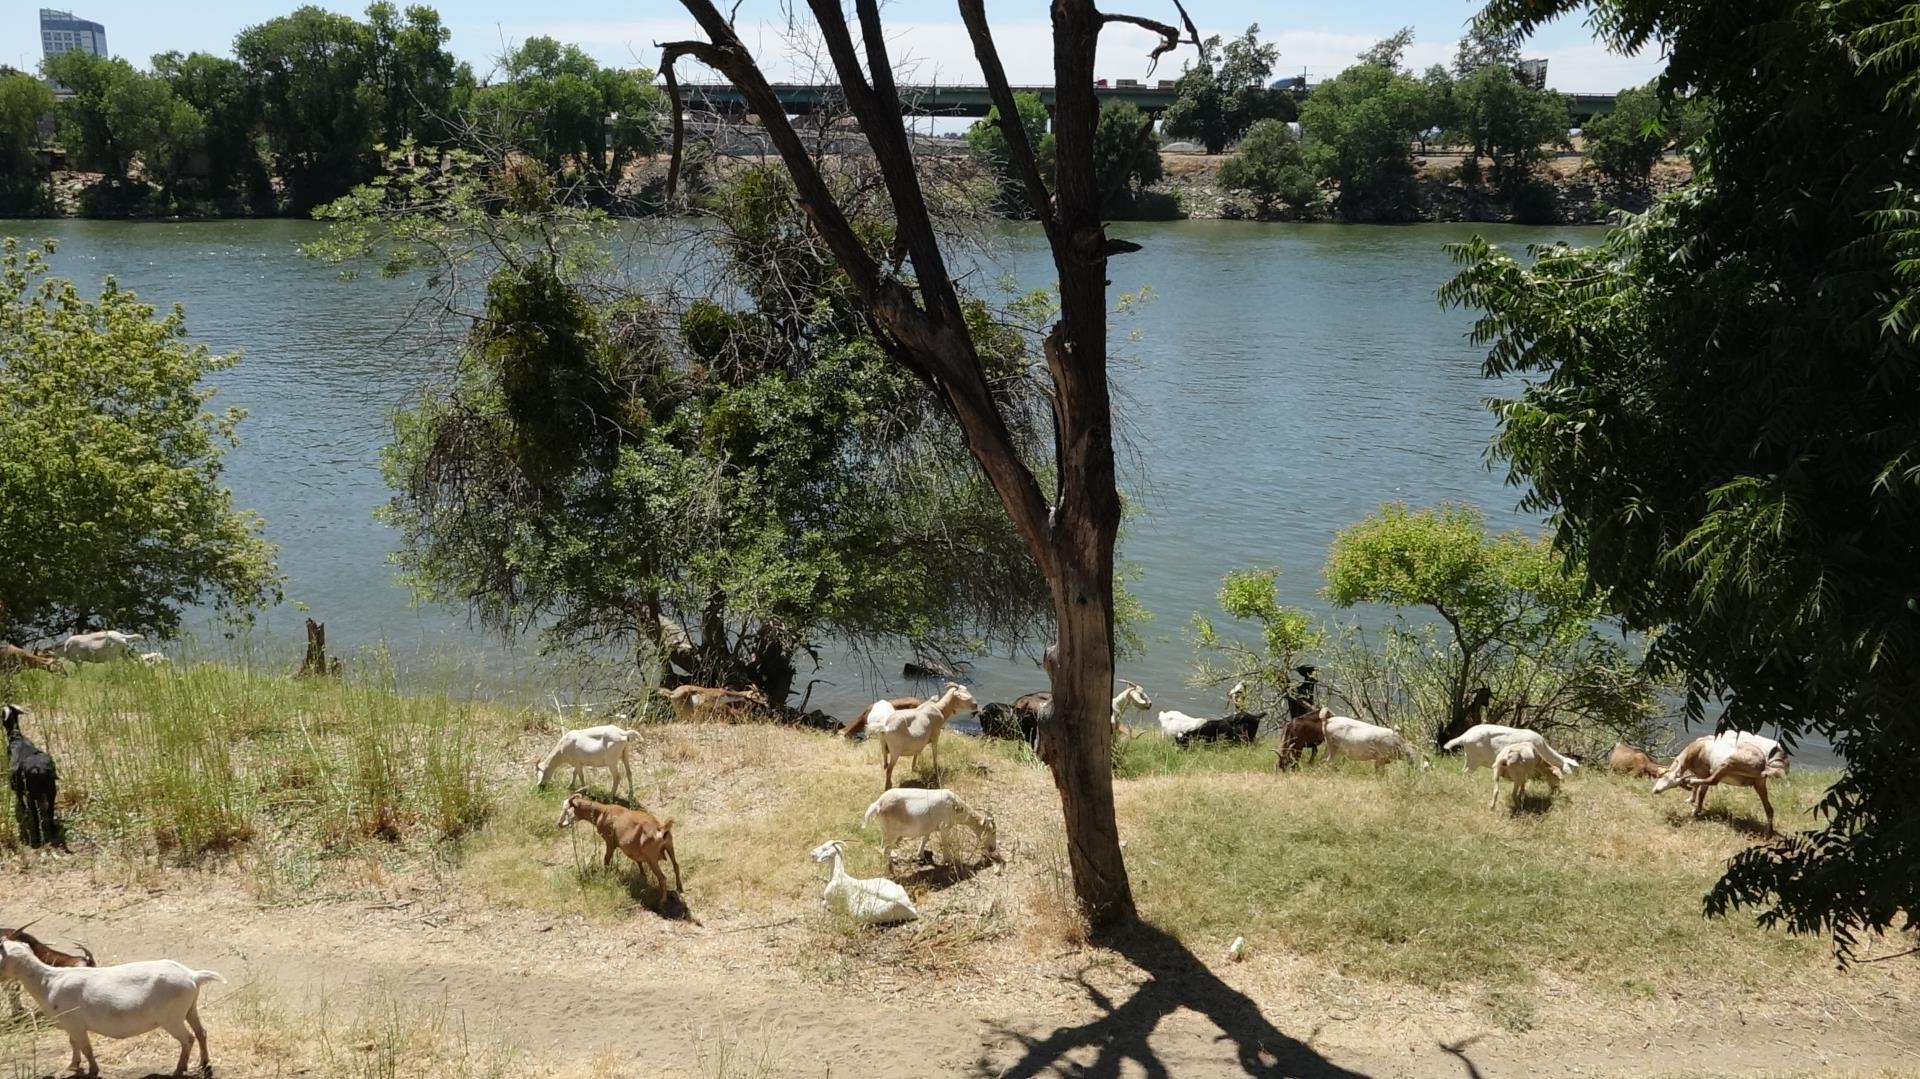 Group of goats by the Sacramento River